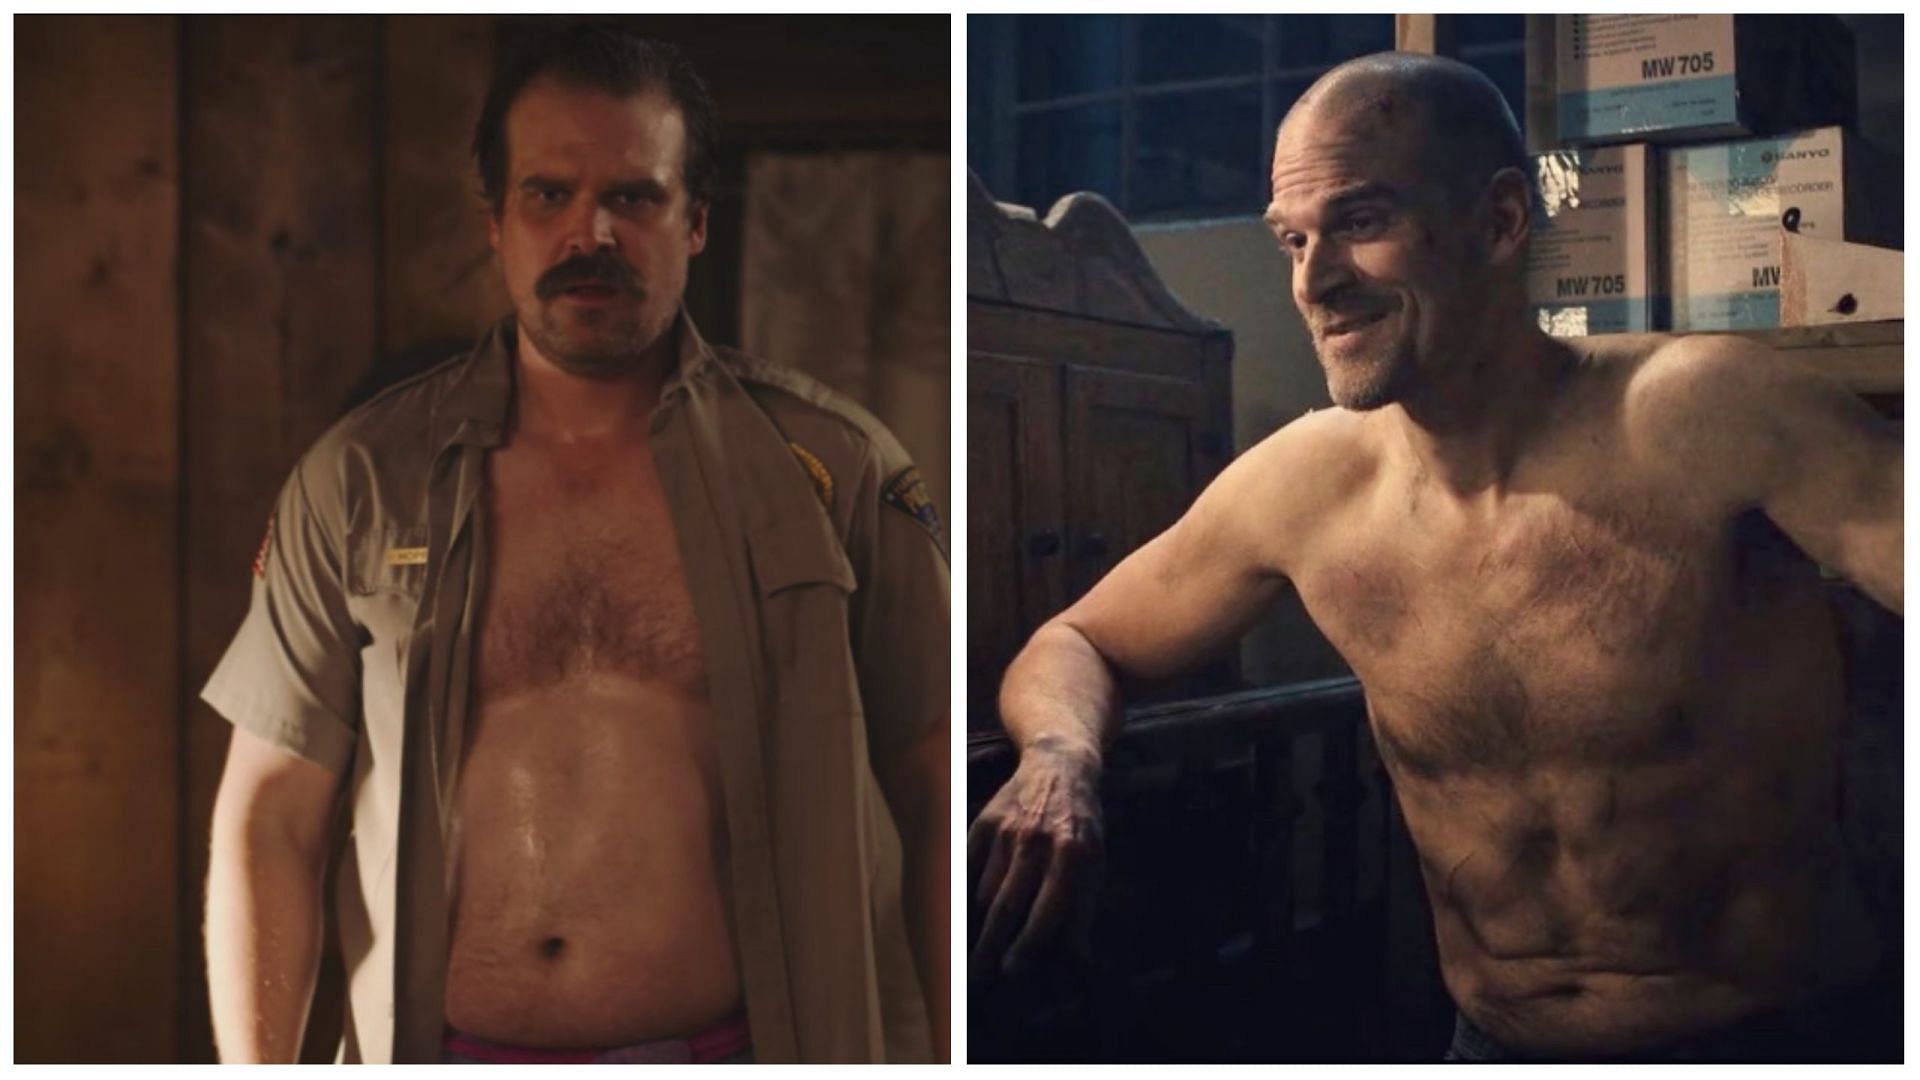 David Harbour ate his meals within a six-to-eight-hour time frame during the day. (Image via Instagram @chiefharbour)